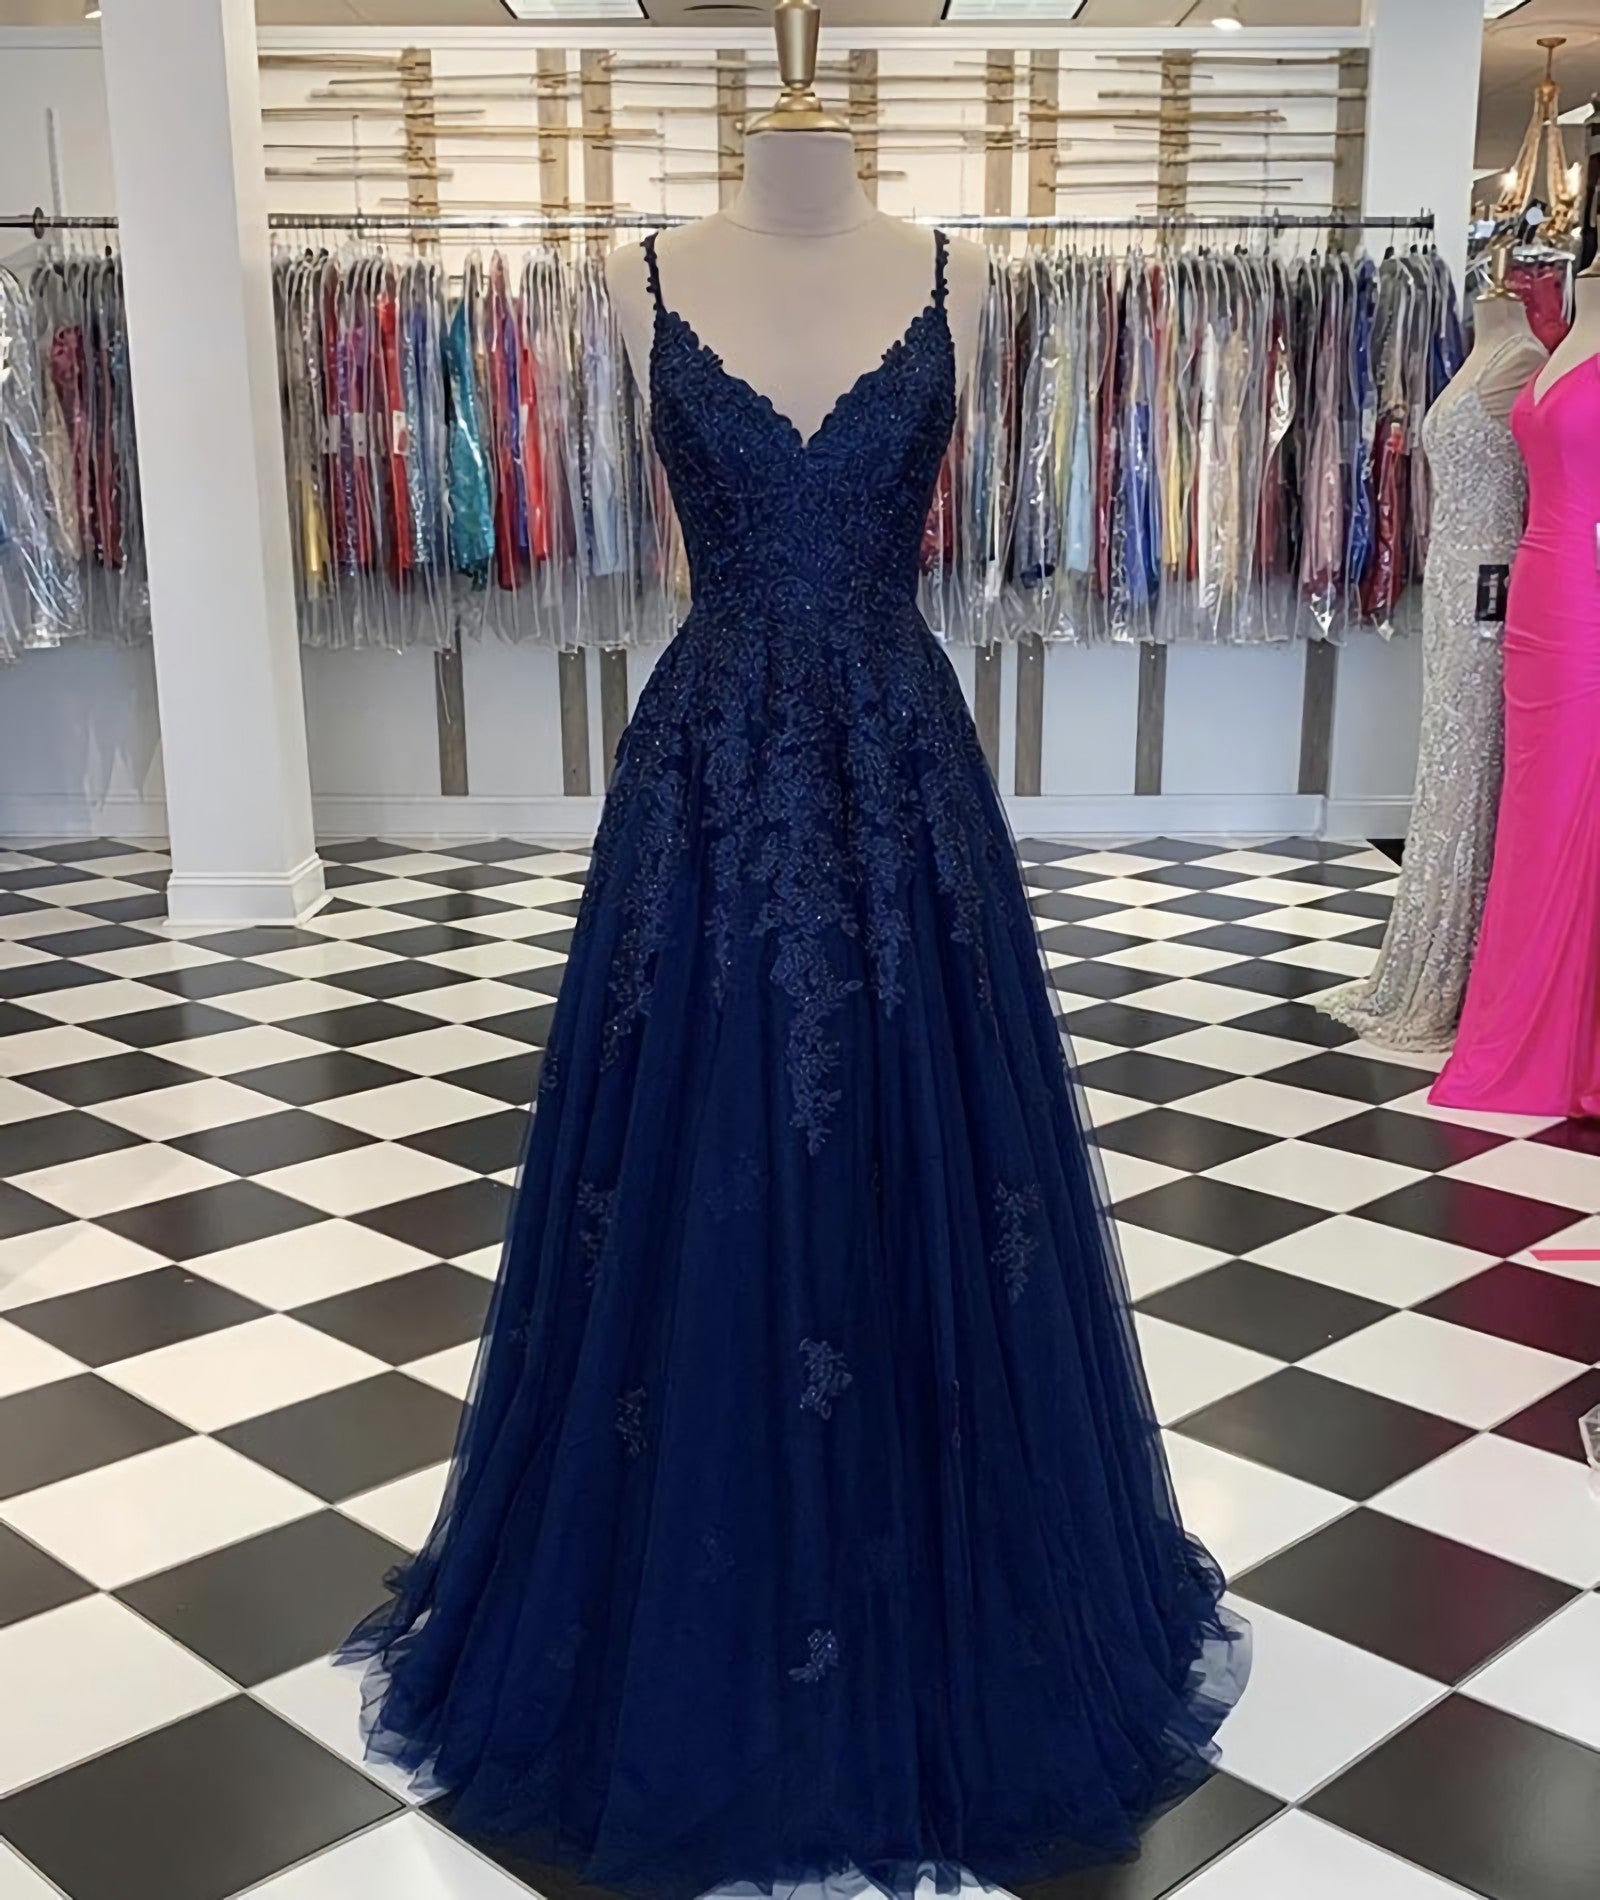 Party Dress Over 49, Blue V Neck Tulle Lace Long Prom Dress, Evening Dress